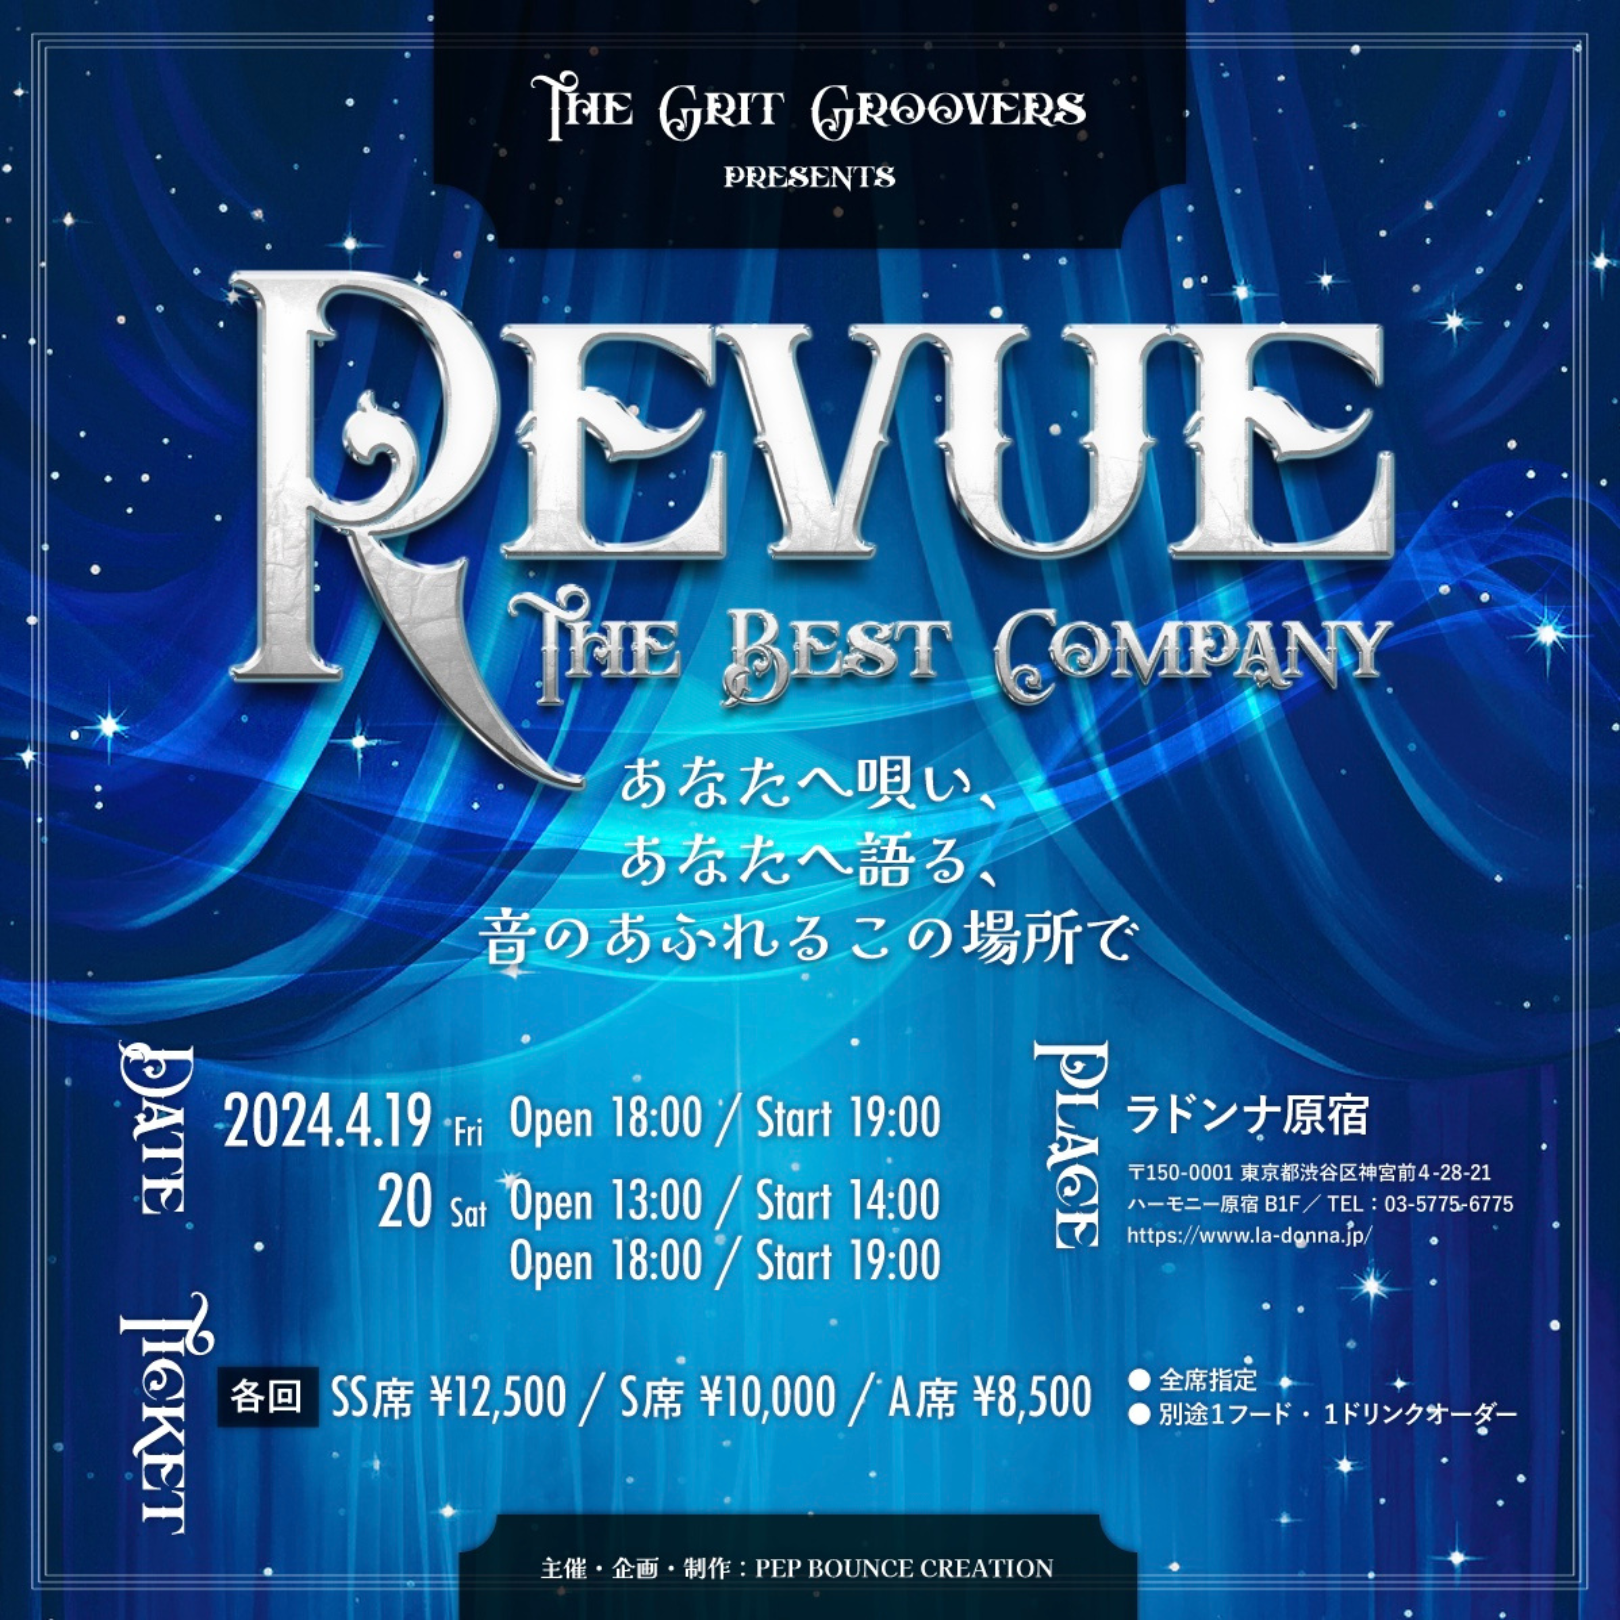 The Grit Groovers presents REVUE <br>−THE BEST COMPANY−